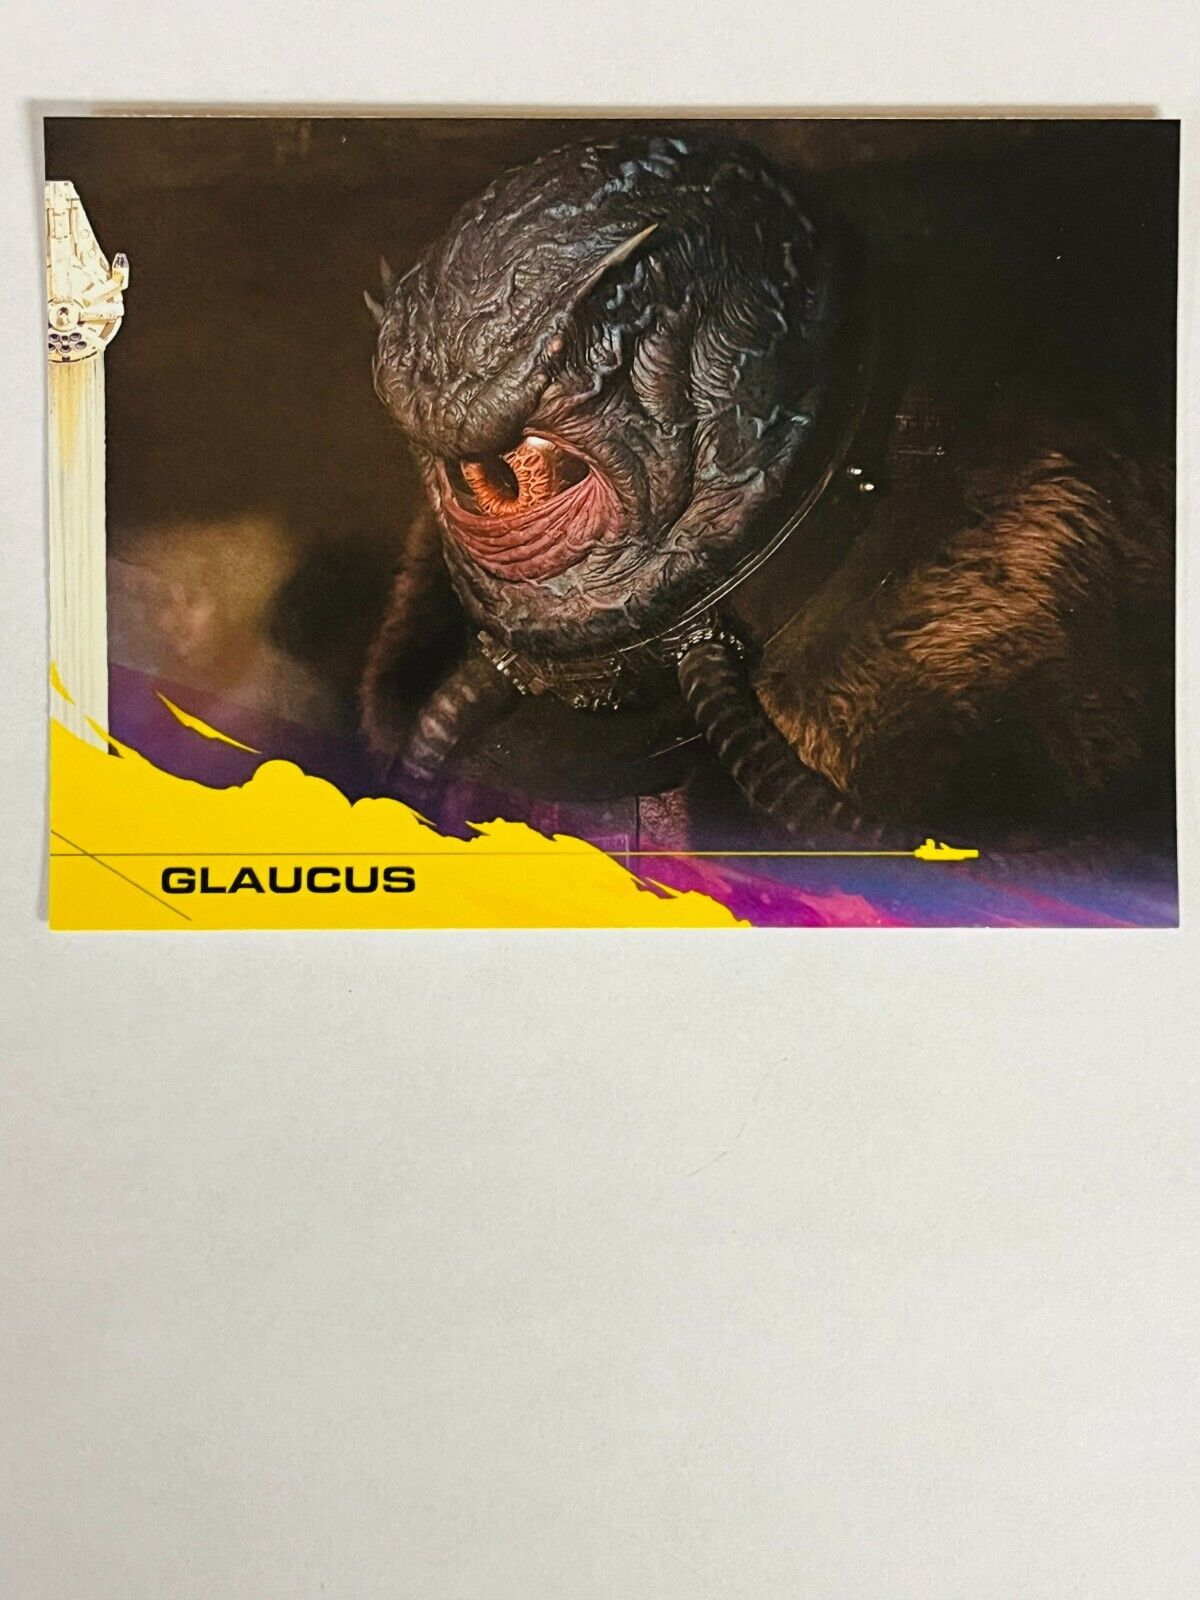 2018 Topps Solo A Star Wars Story Base Card #55 Glaucus